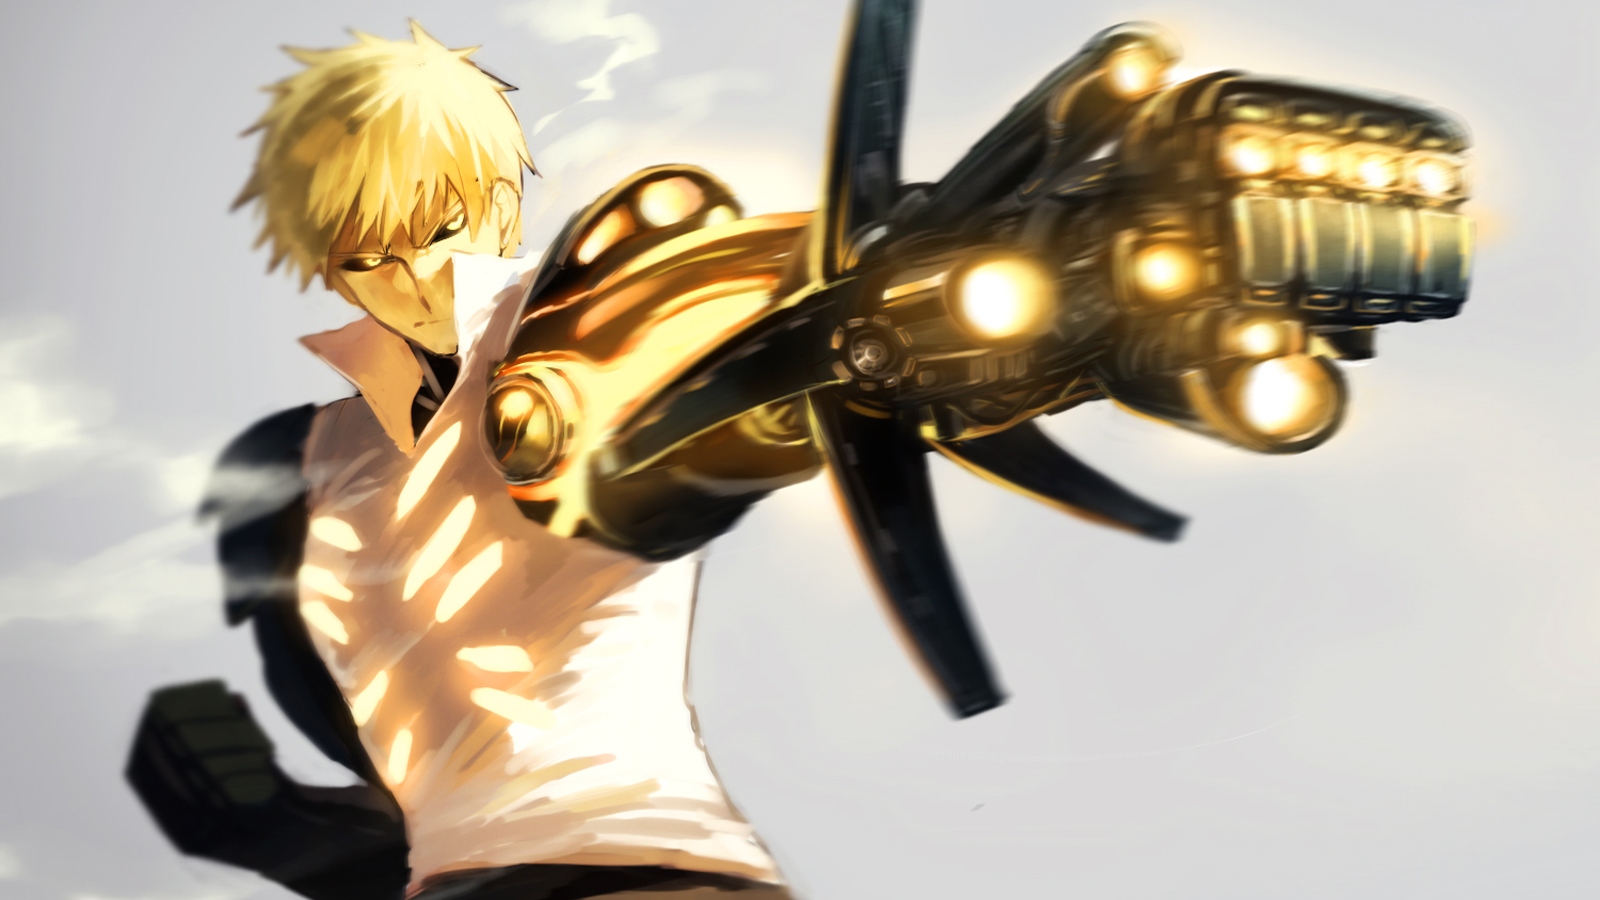 Free Download One Punch Man Genos Wallpapers For Laptops 6382 Hd Wallpapers Site 1600x900 For Your Desktop Mobile Tablet Explore 46 One Punch Man Wallpaper Hd One Punch Man - genos 2 roblox